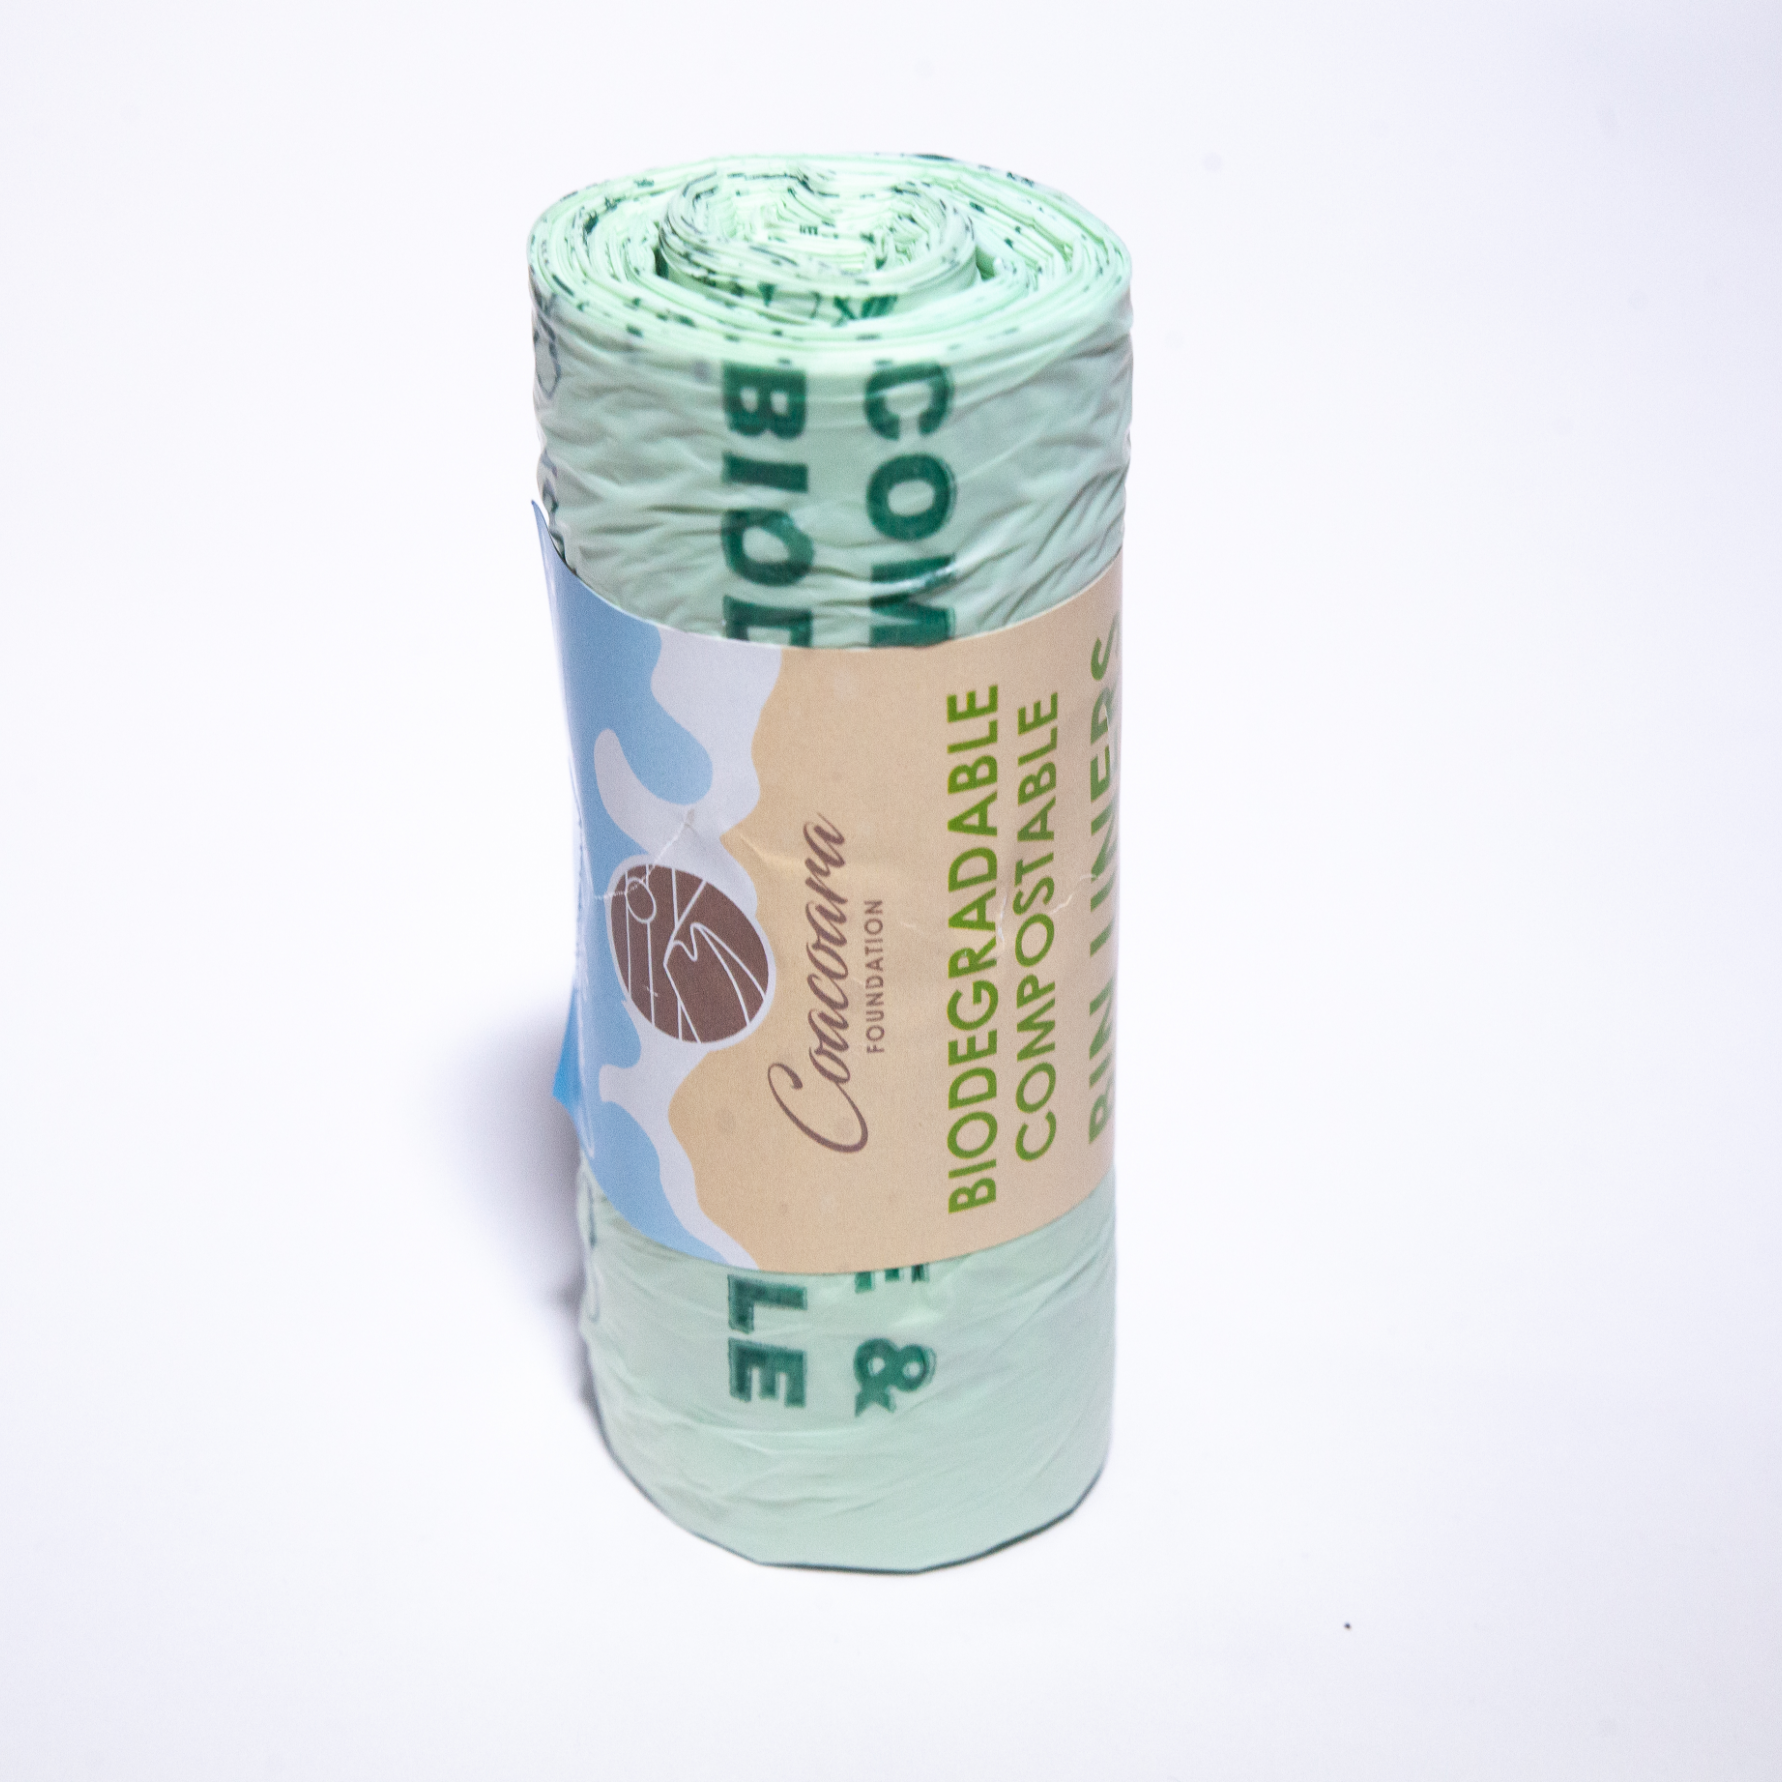 Biodegradable Compostable Bin Liners 7/8 litres (Caddy Size)